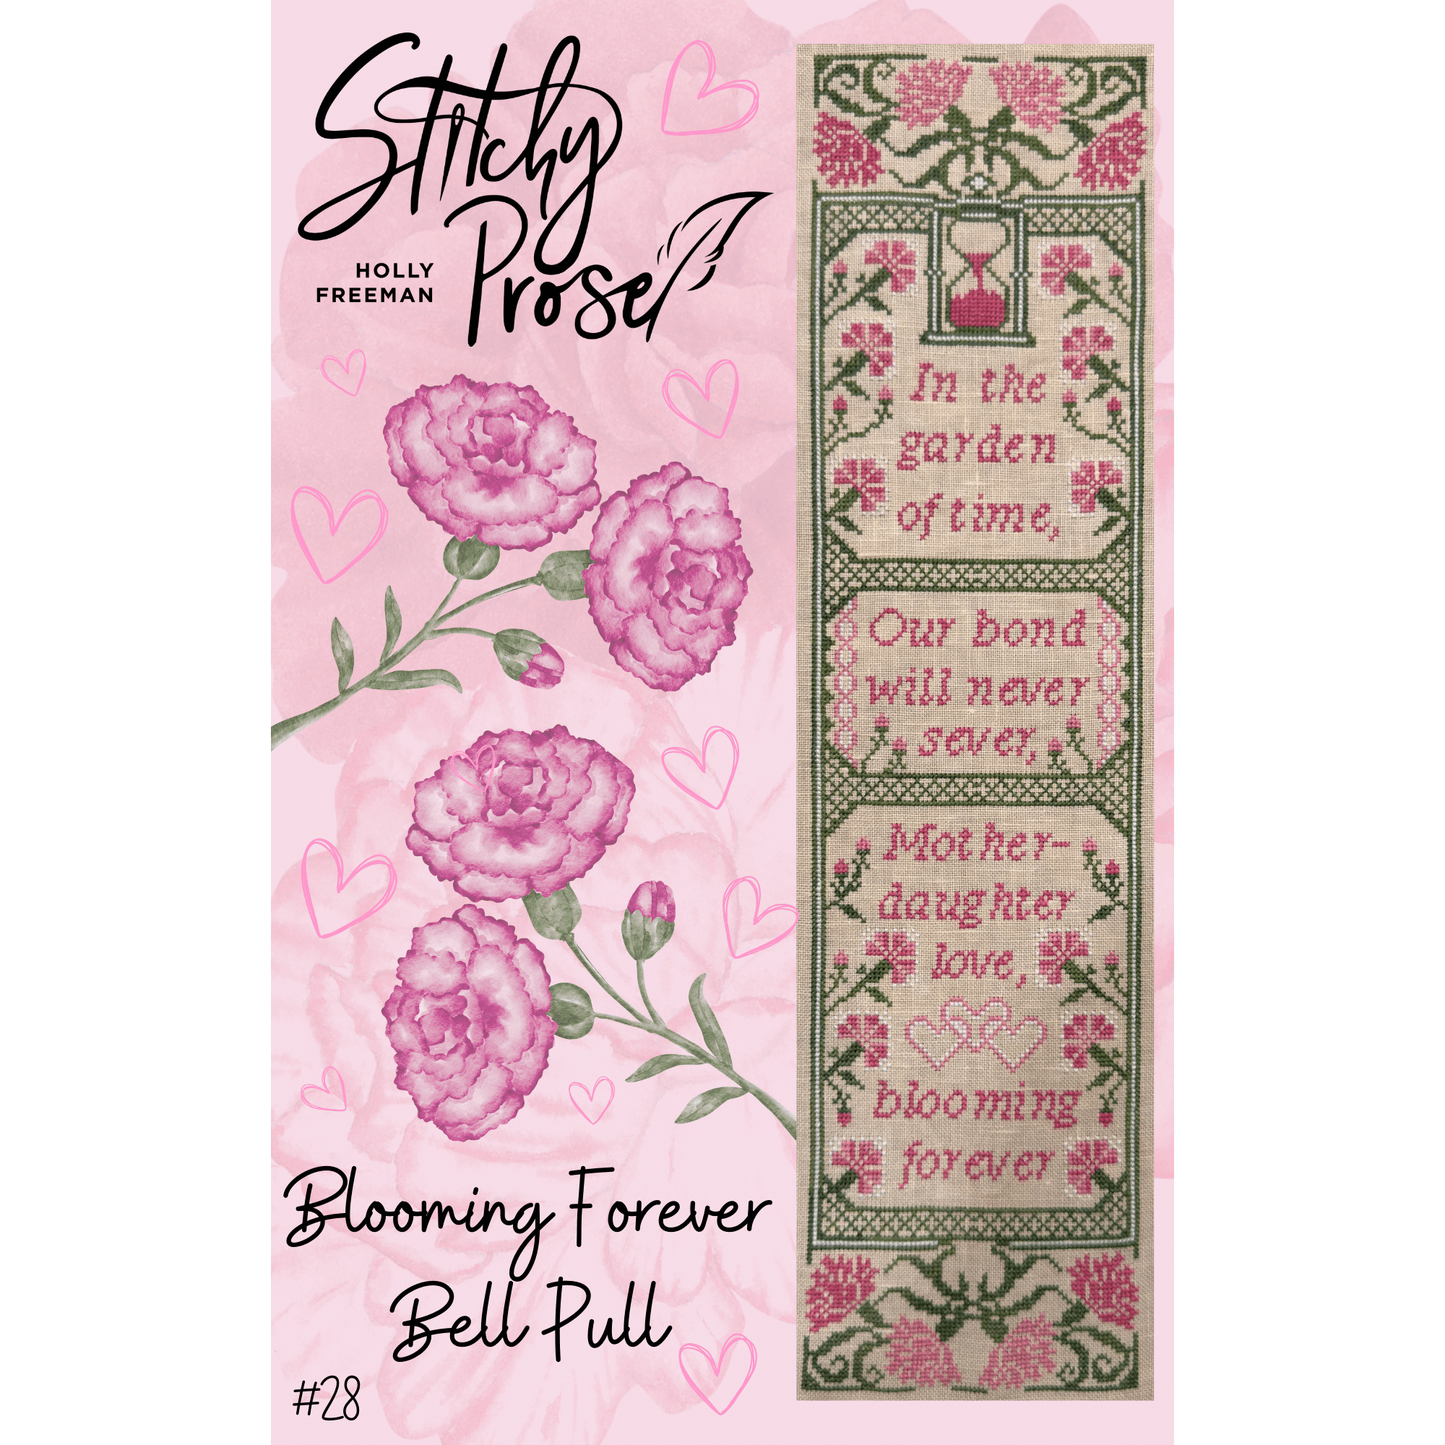 Blooming Forever Bell Pull Pattern